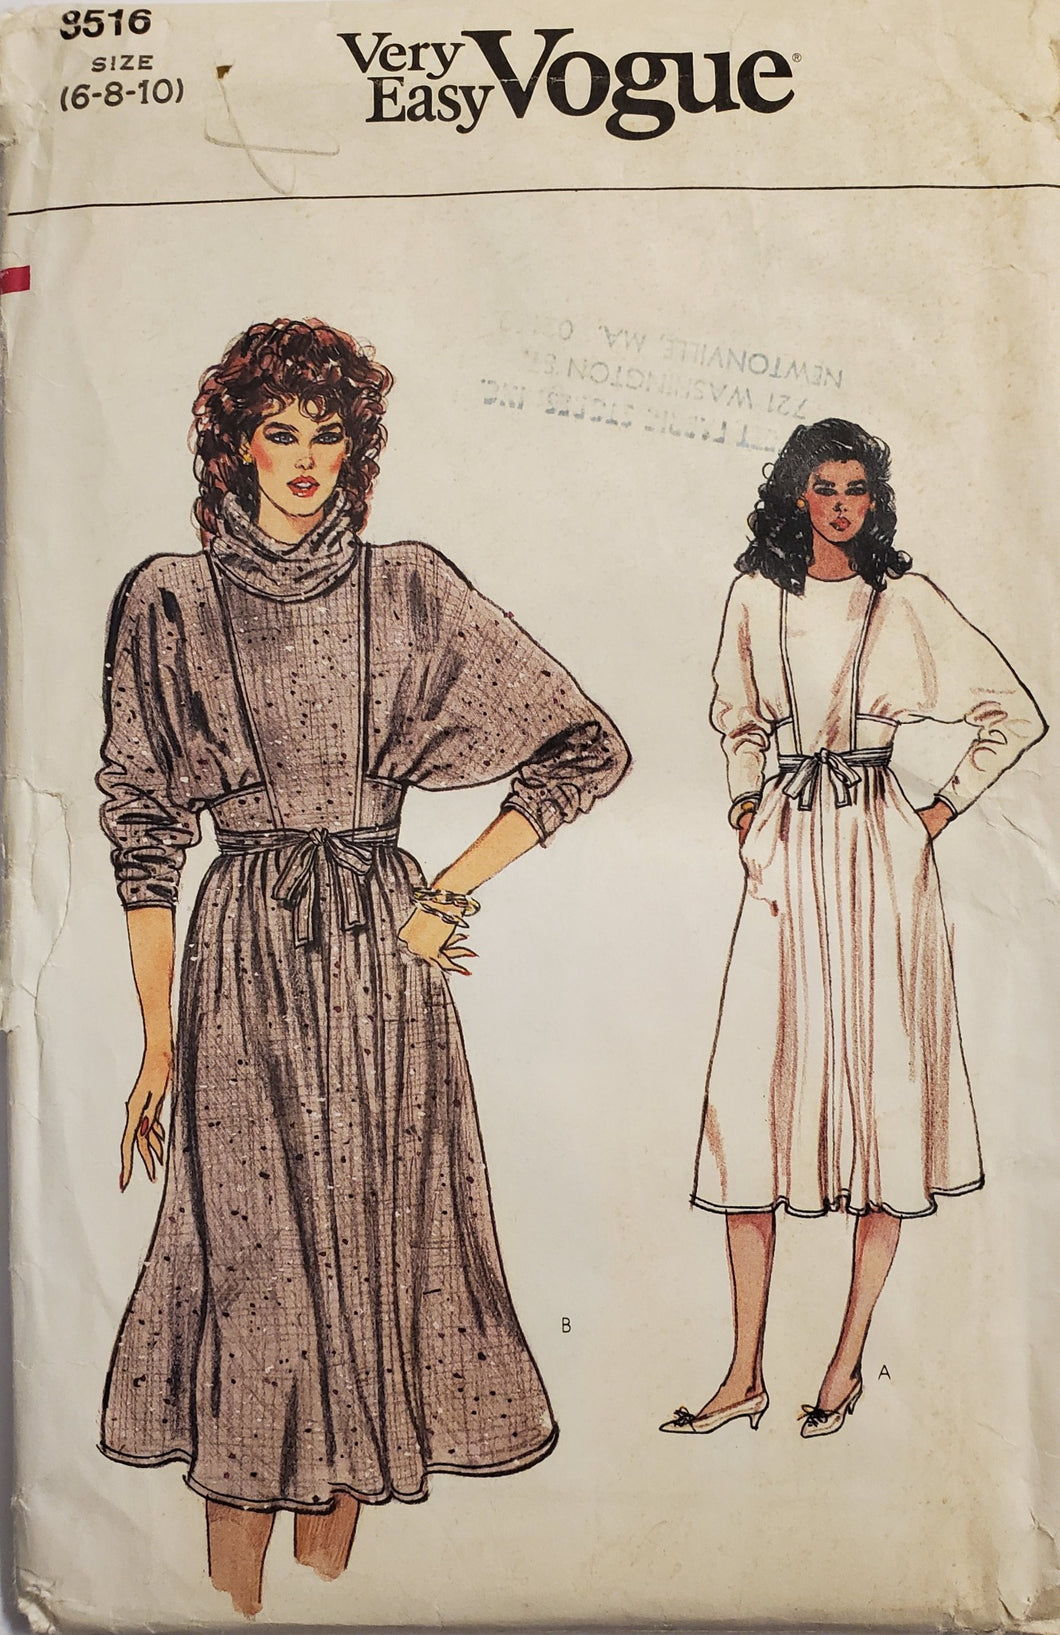 Vintage Vogue Pattern 8516 ,Very Easy, UNCUT, Misses Dress Size 6-8-10, Extremely Rare